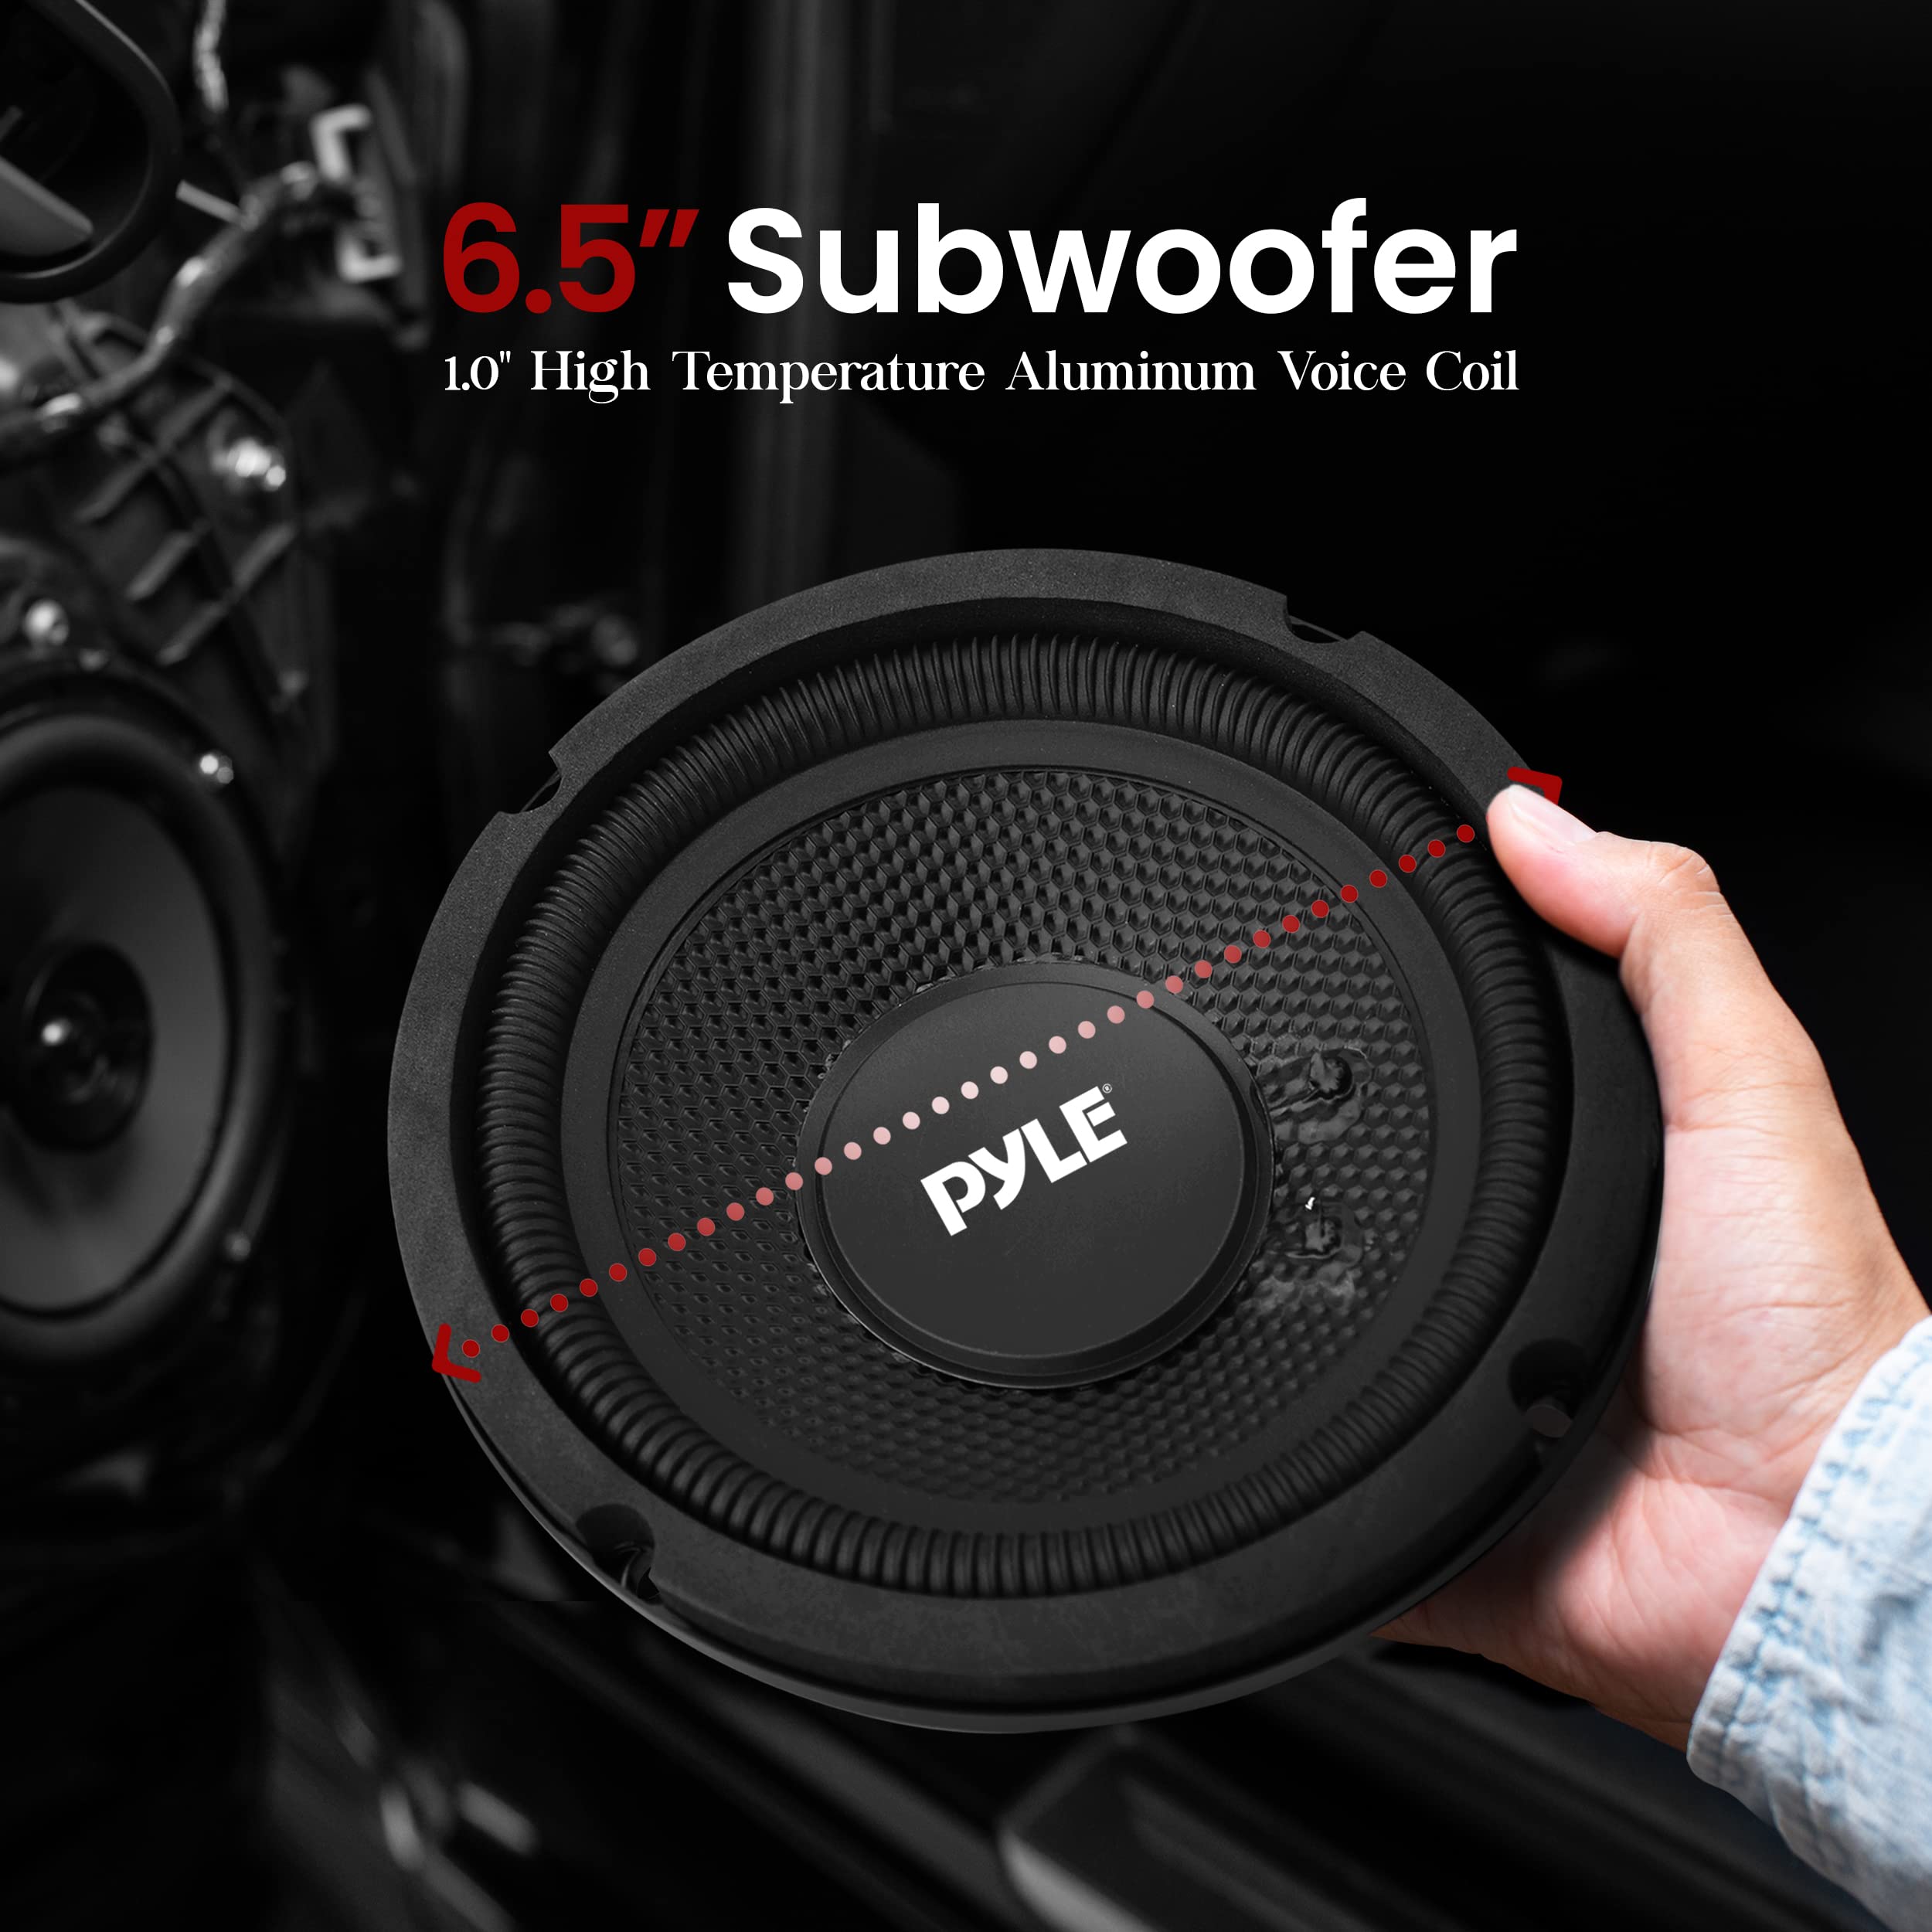 PyleUsa Single Voice Coil Car Subwoofer - 6.5 Inches, 150 Watts at 4-Ohm Car Audio Powered Subwoofer, Injection Cone with Rubber Edge,Car Subwoofer, Audio - PLMW63 Black